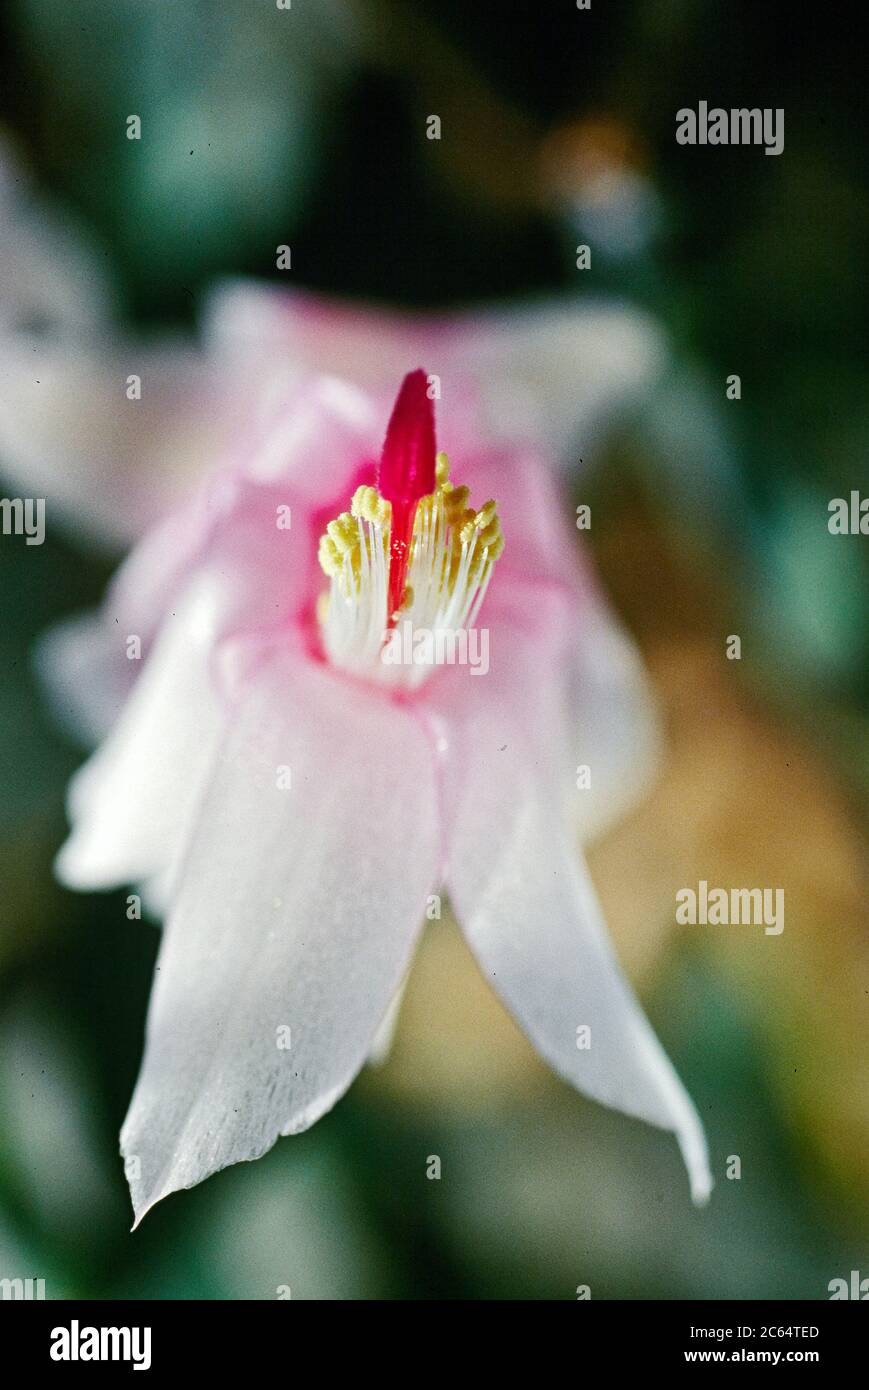 A close up image of a flower from a Christmas Cactus Stock Photo